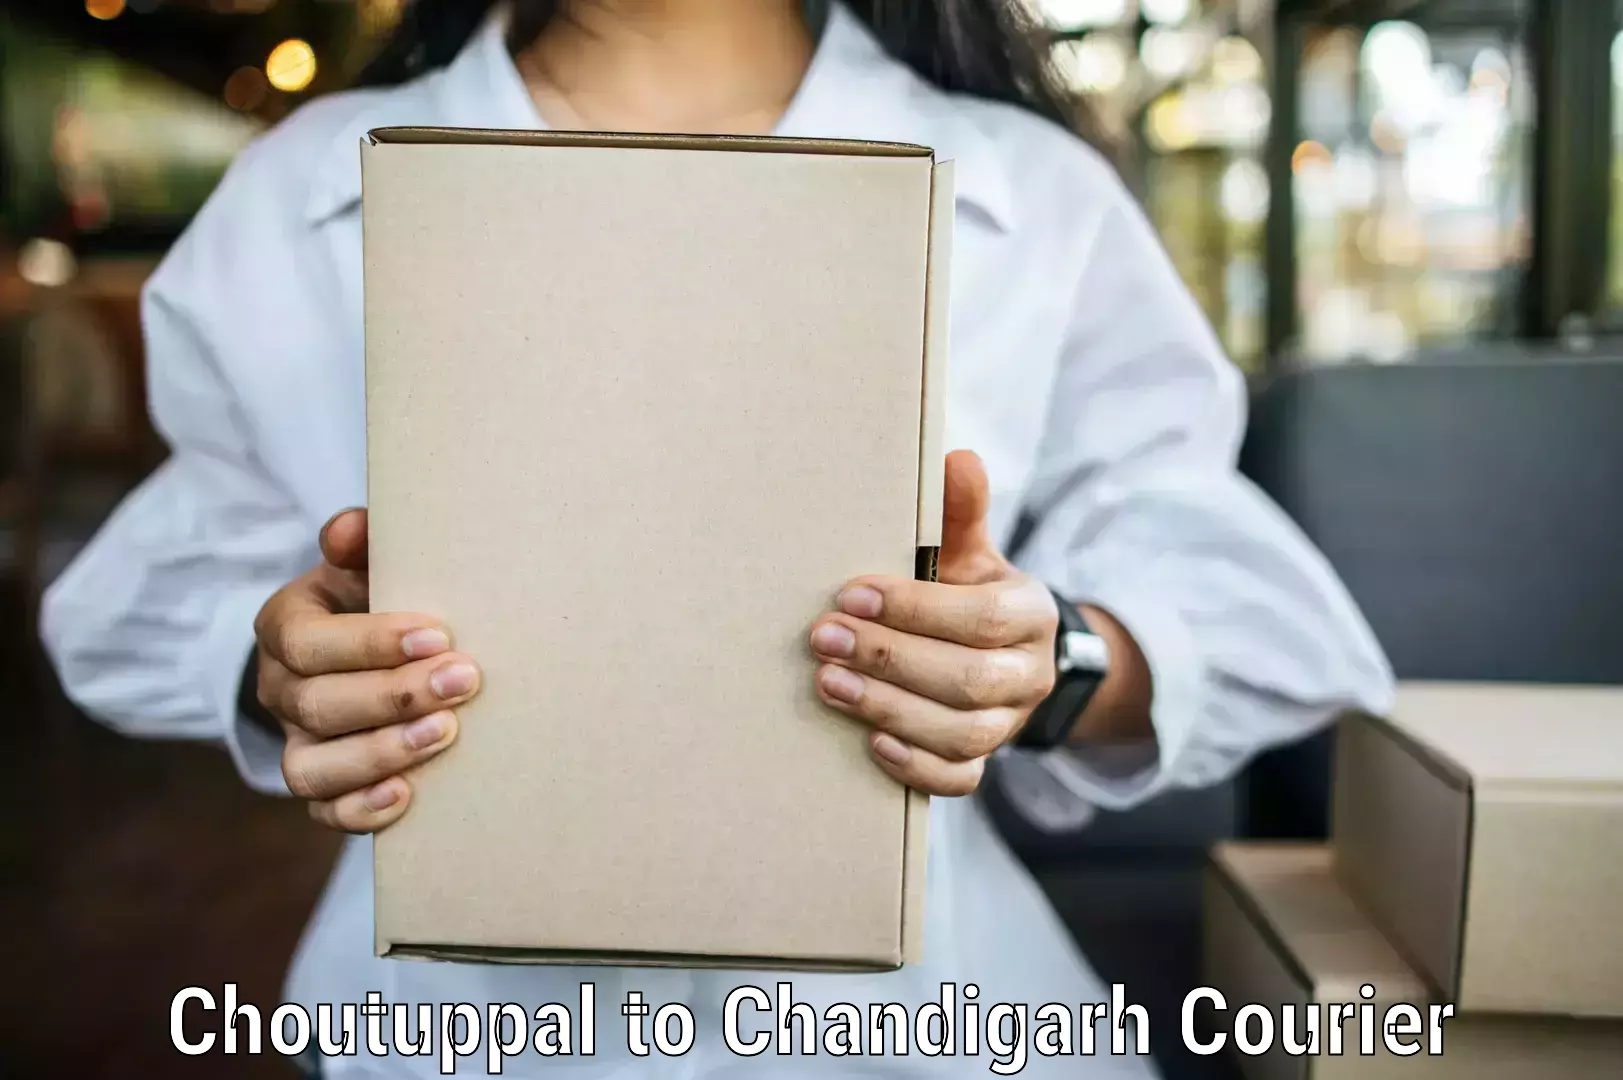 Reliable shipping partners Choutuppal to Chandigarh